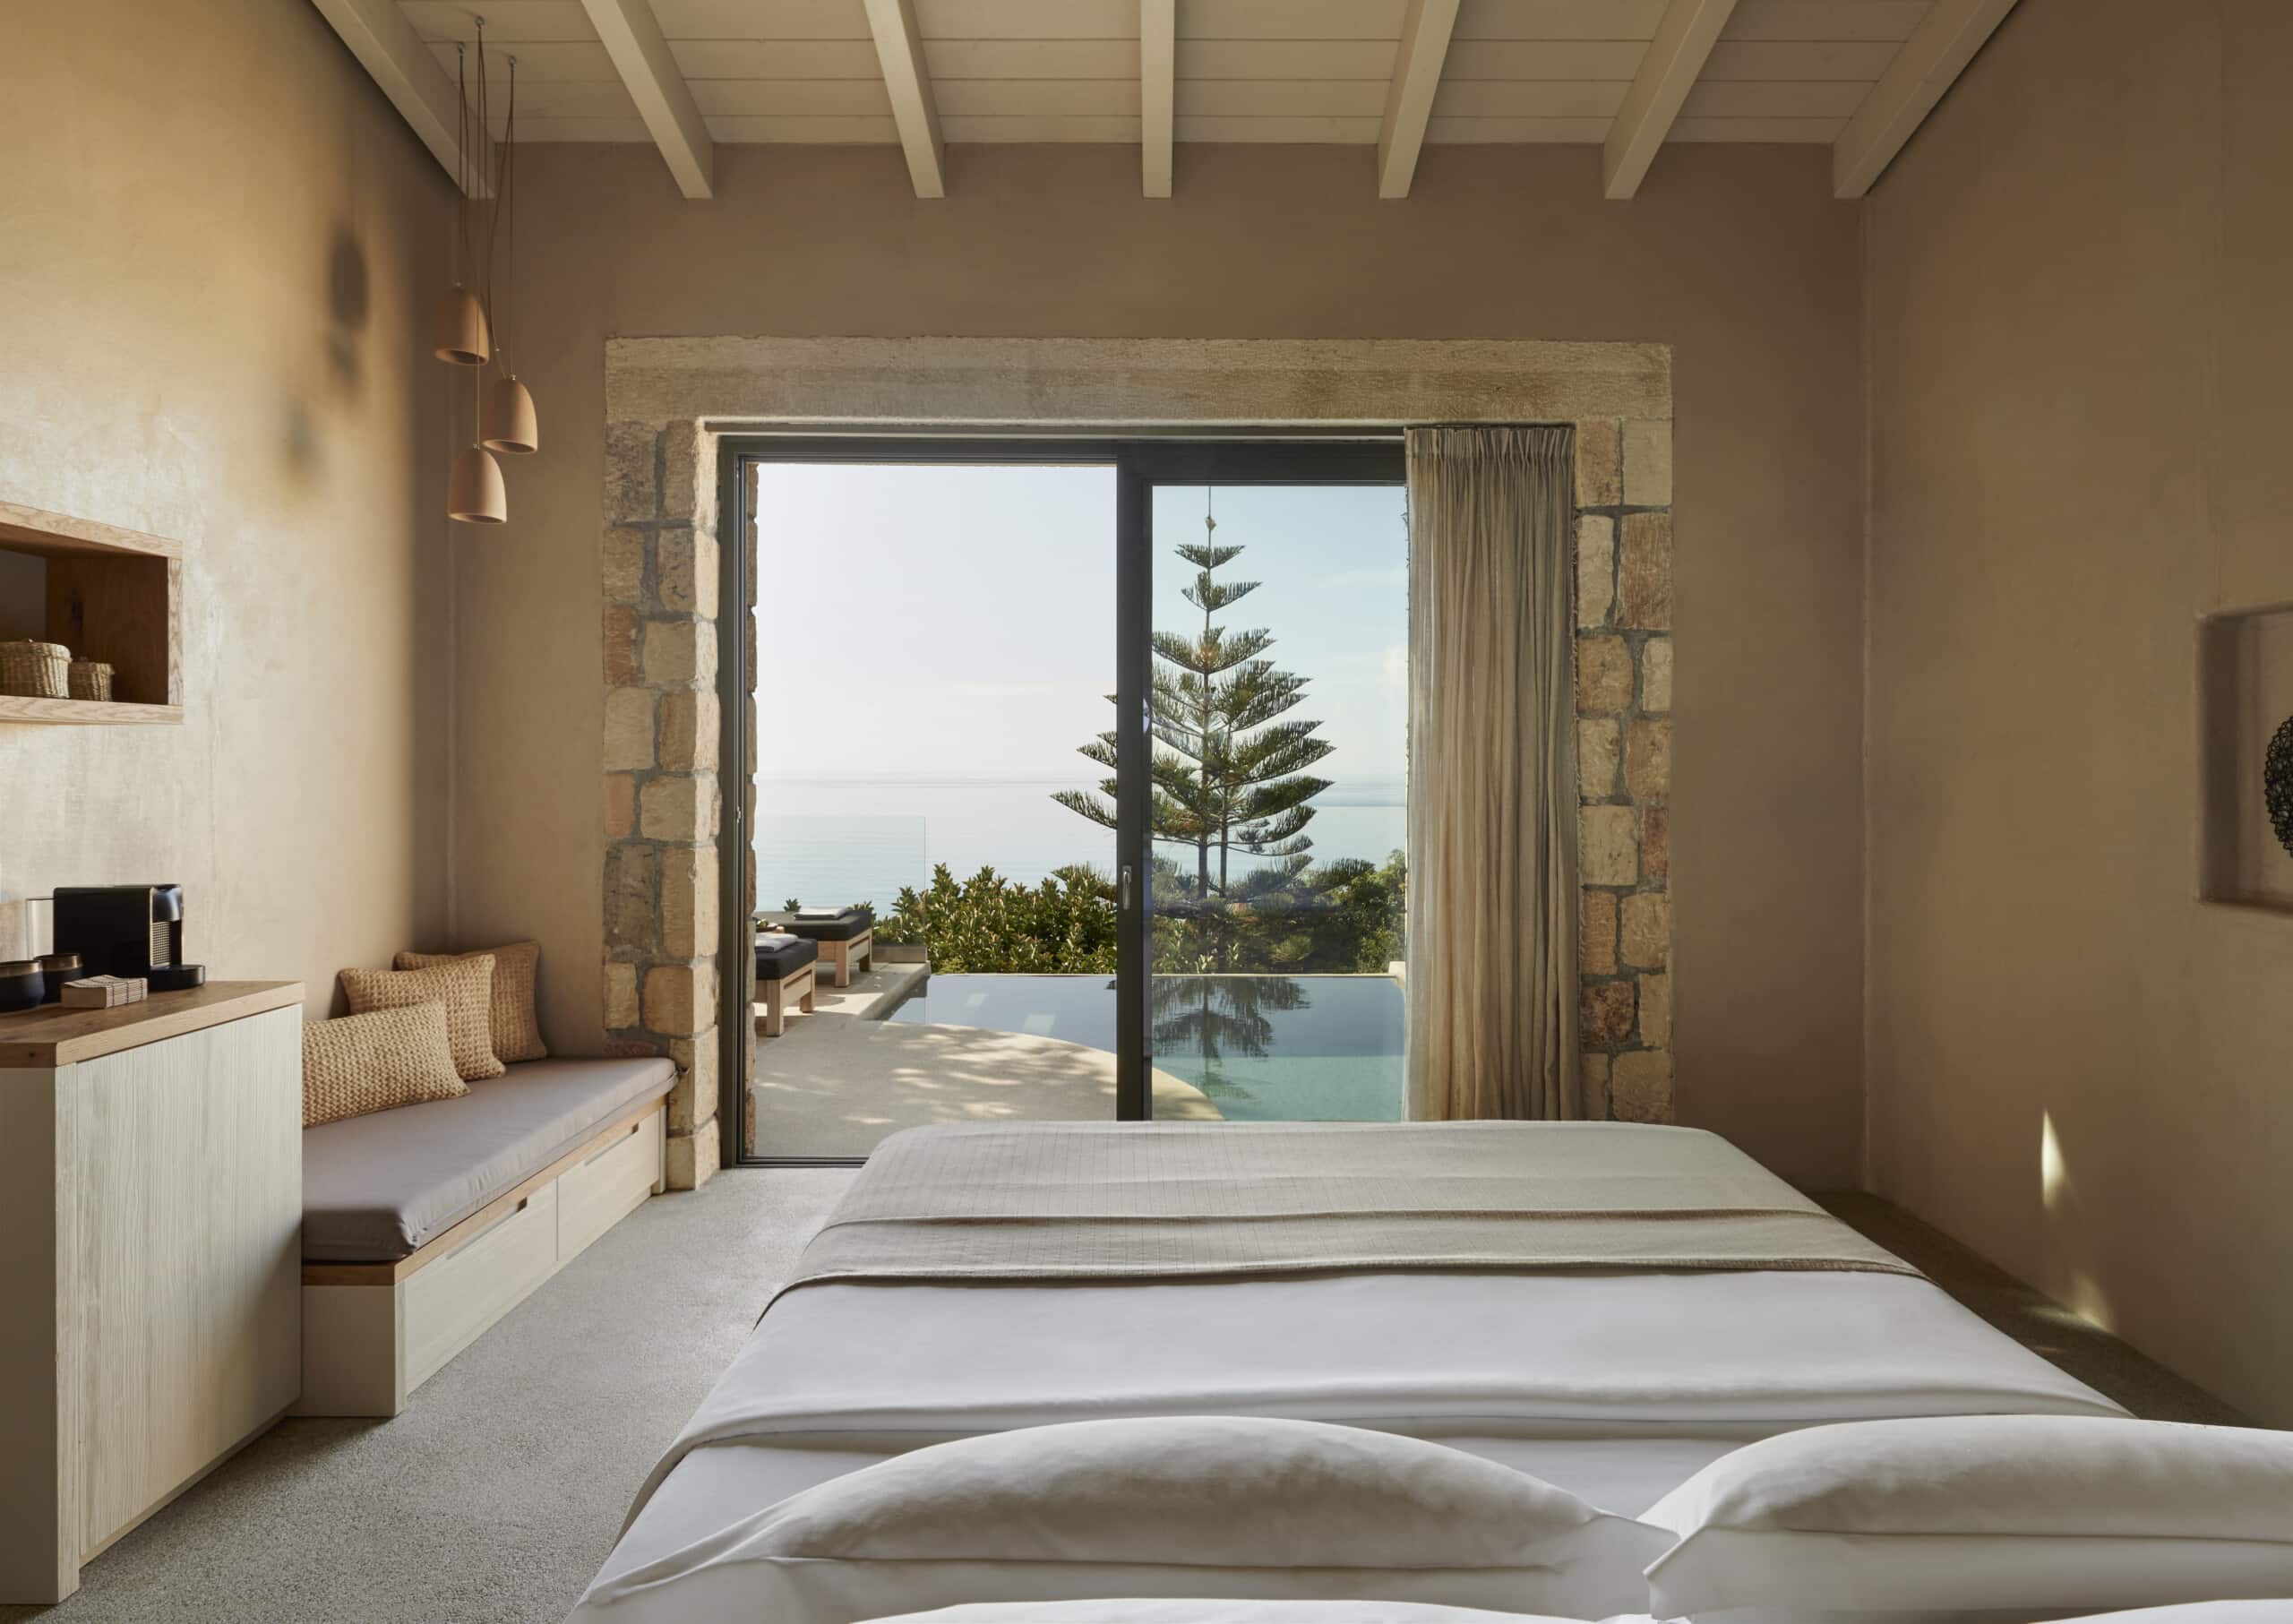 Luxury room design with pool view in Kefalonia